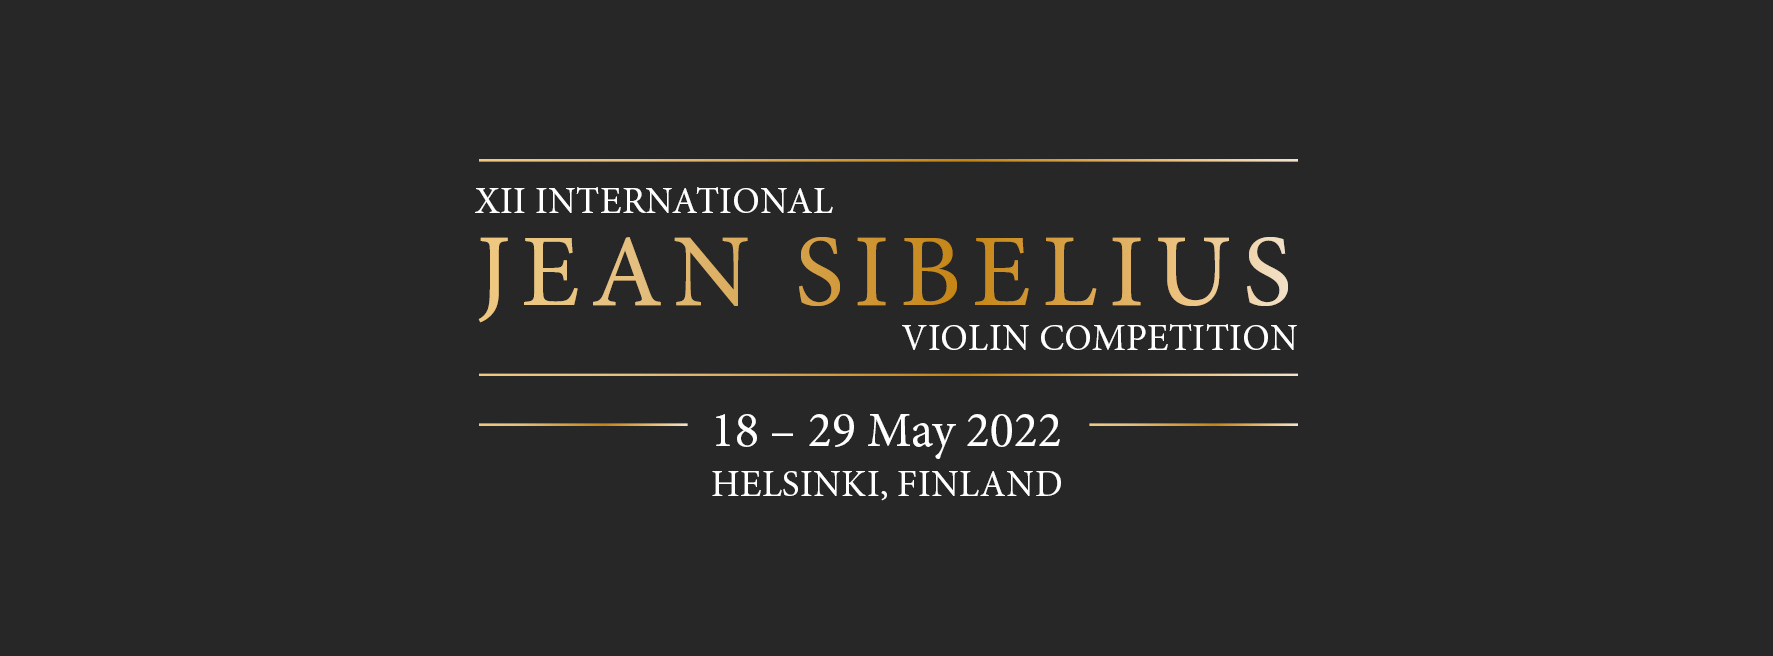 Sion concours  Tibor Junior Competition 2022: registration is